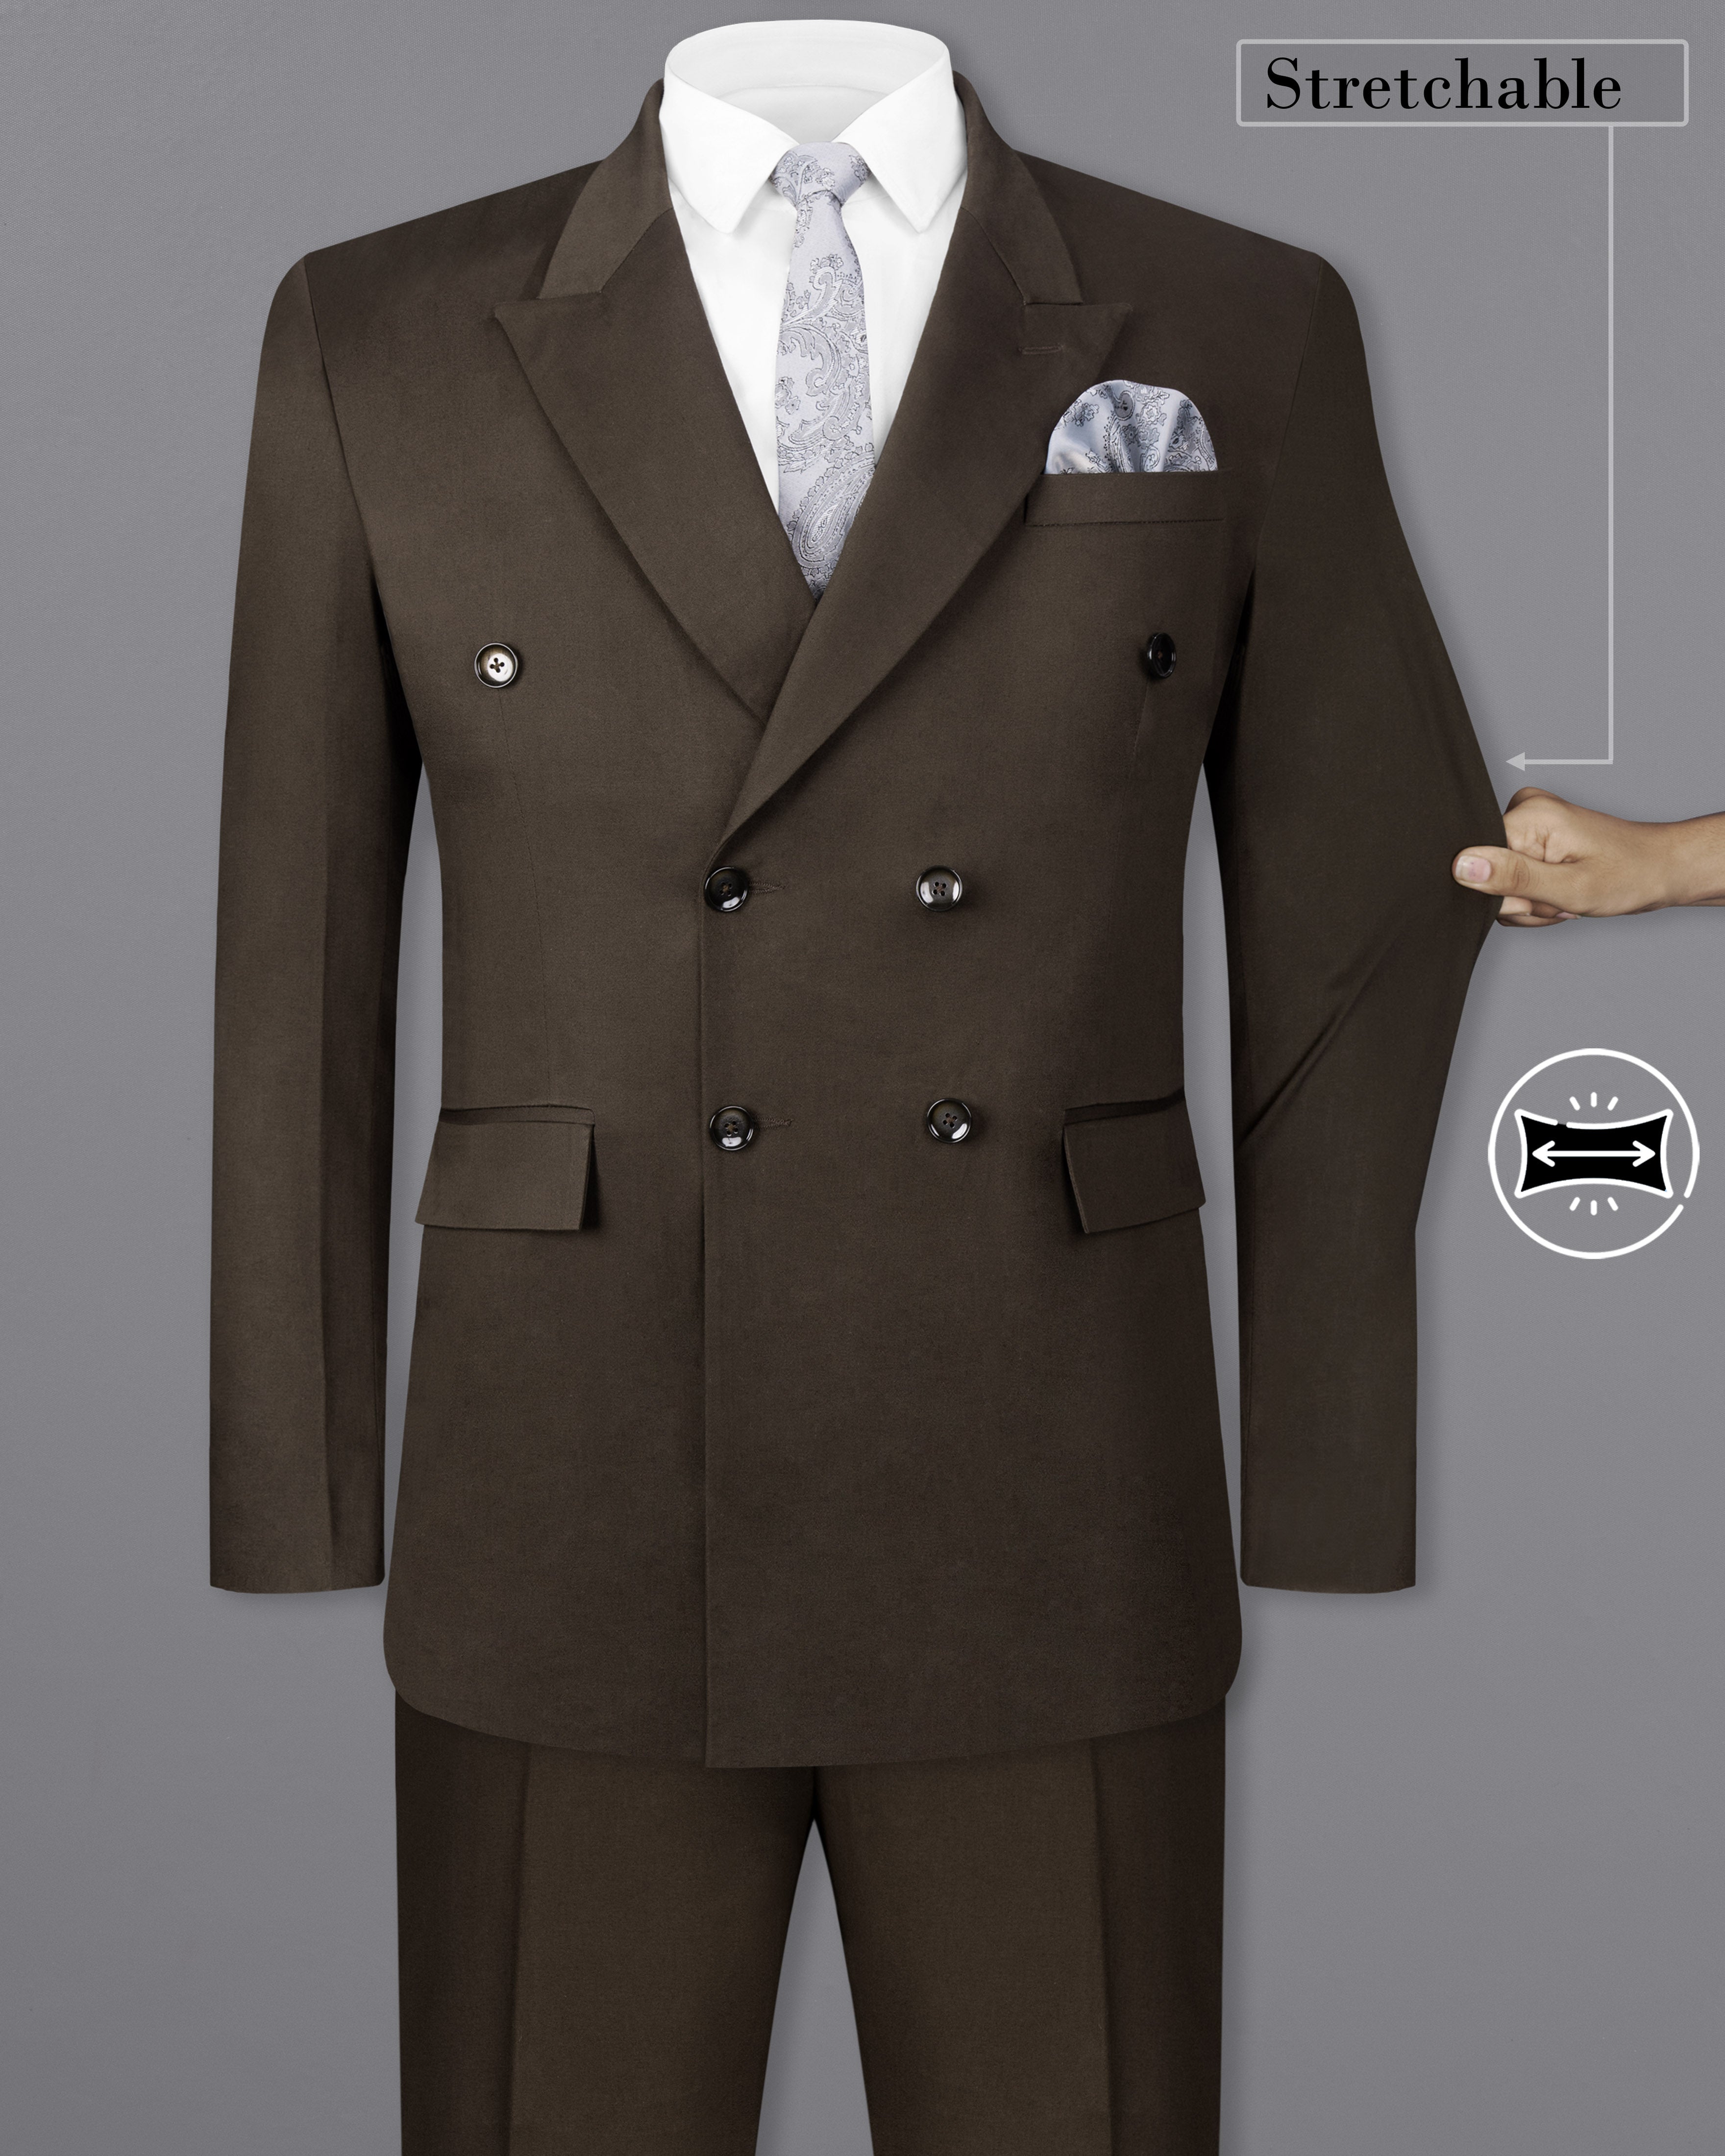 Walnut Brown Solid Stretchable Premium Cotton Double Breasted traveler Suit ST2628-DB-36,ST2628-DB-38,ST2628-DB-40,ST2628-DB-42,ST2628-DB-44,ST2628-DB-46,ST2628-DB-48,ST2628-DB-50,ST2628-DB-52,ST2628-DB-54,ST2628-DB-56,ST2628-DB-58,ST2628-DB-60